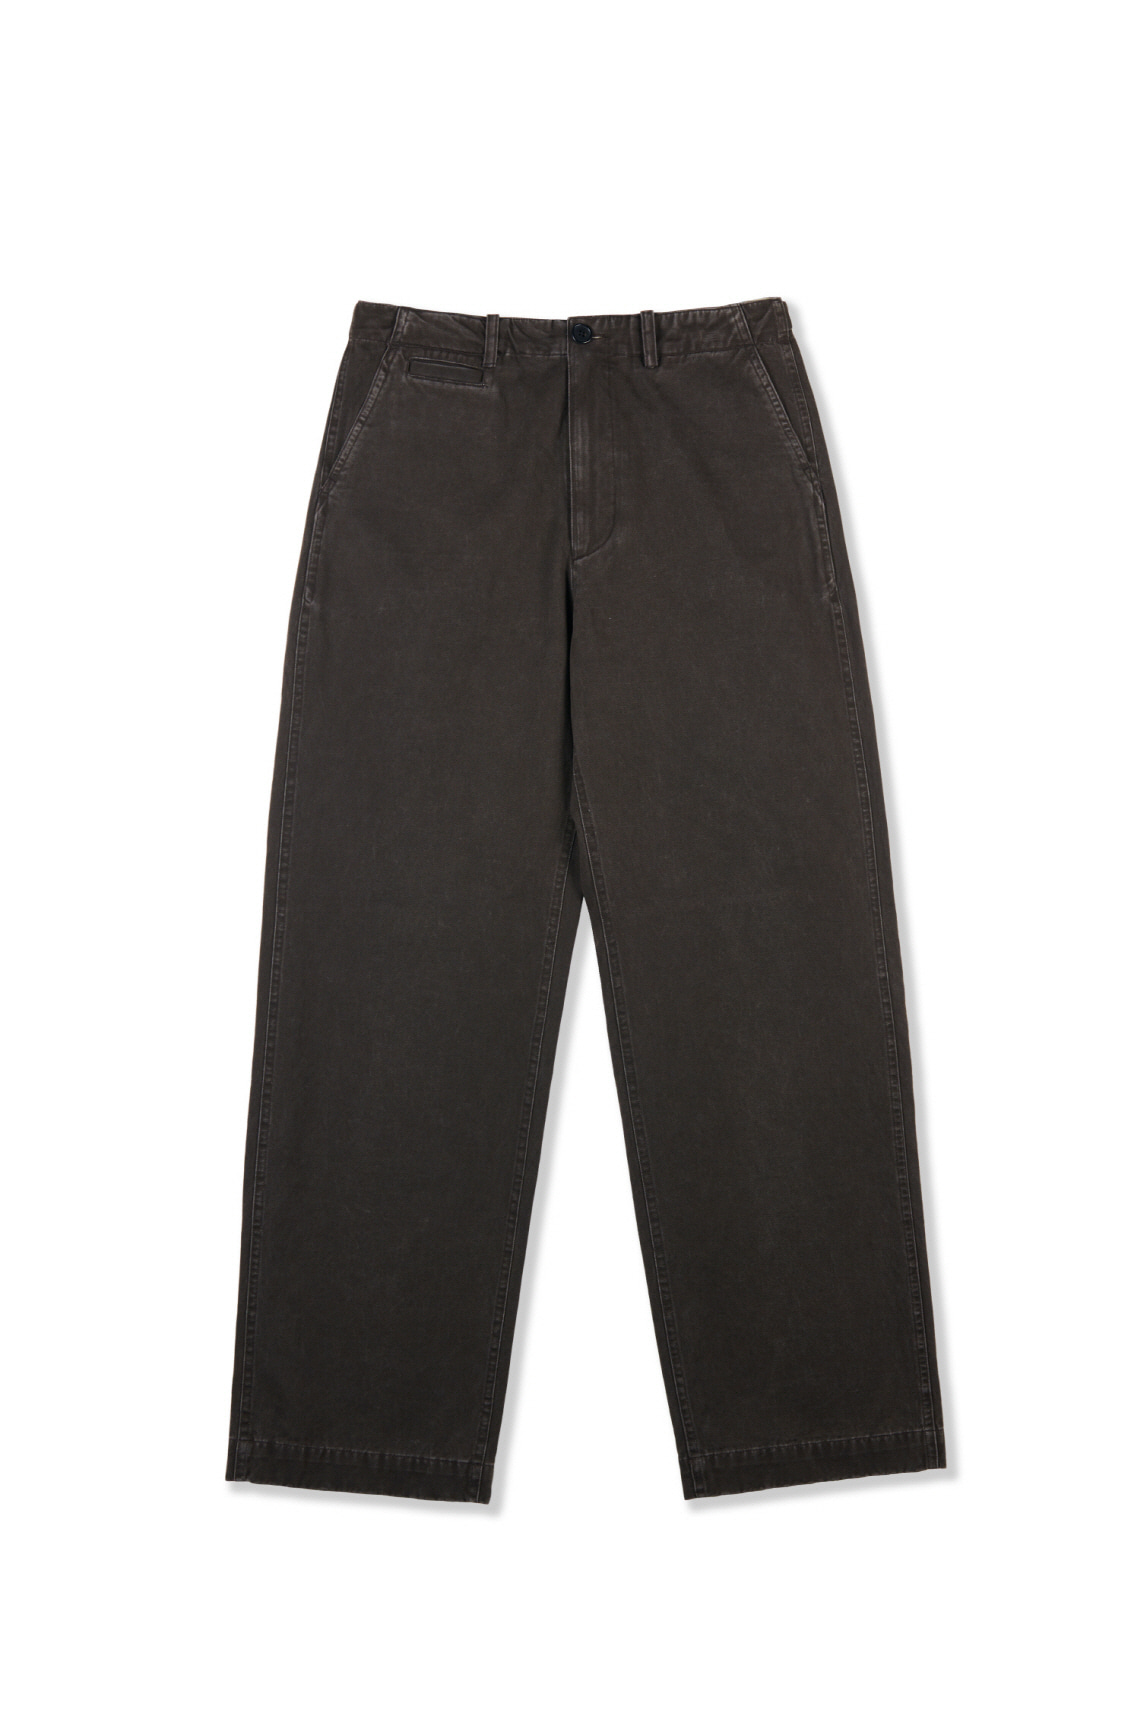 [23&#039;AW] chino trousers_charcoal brown